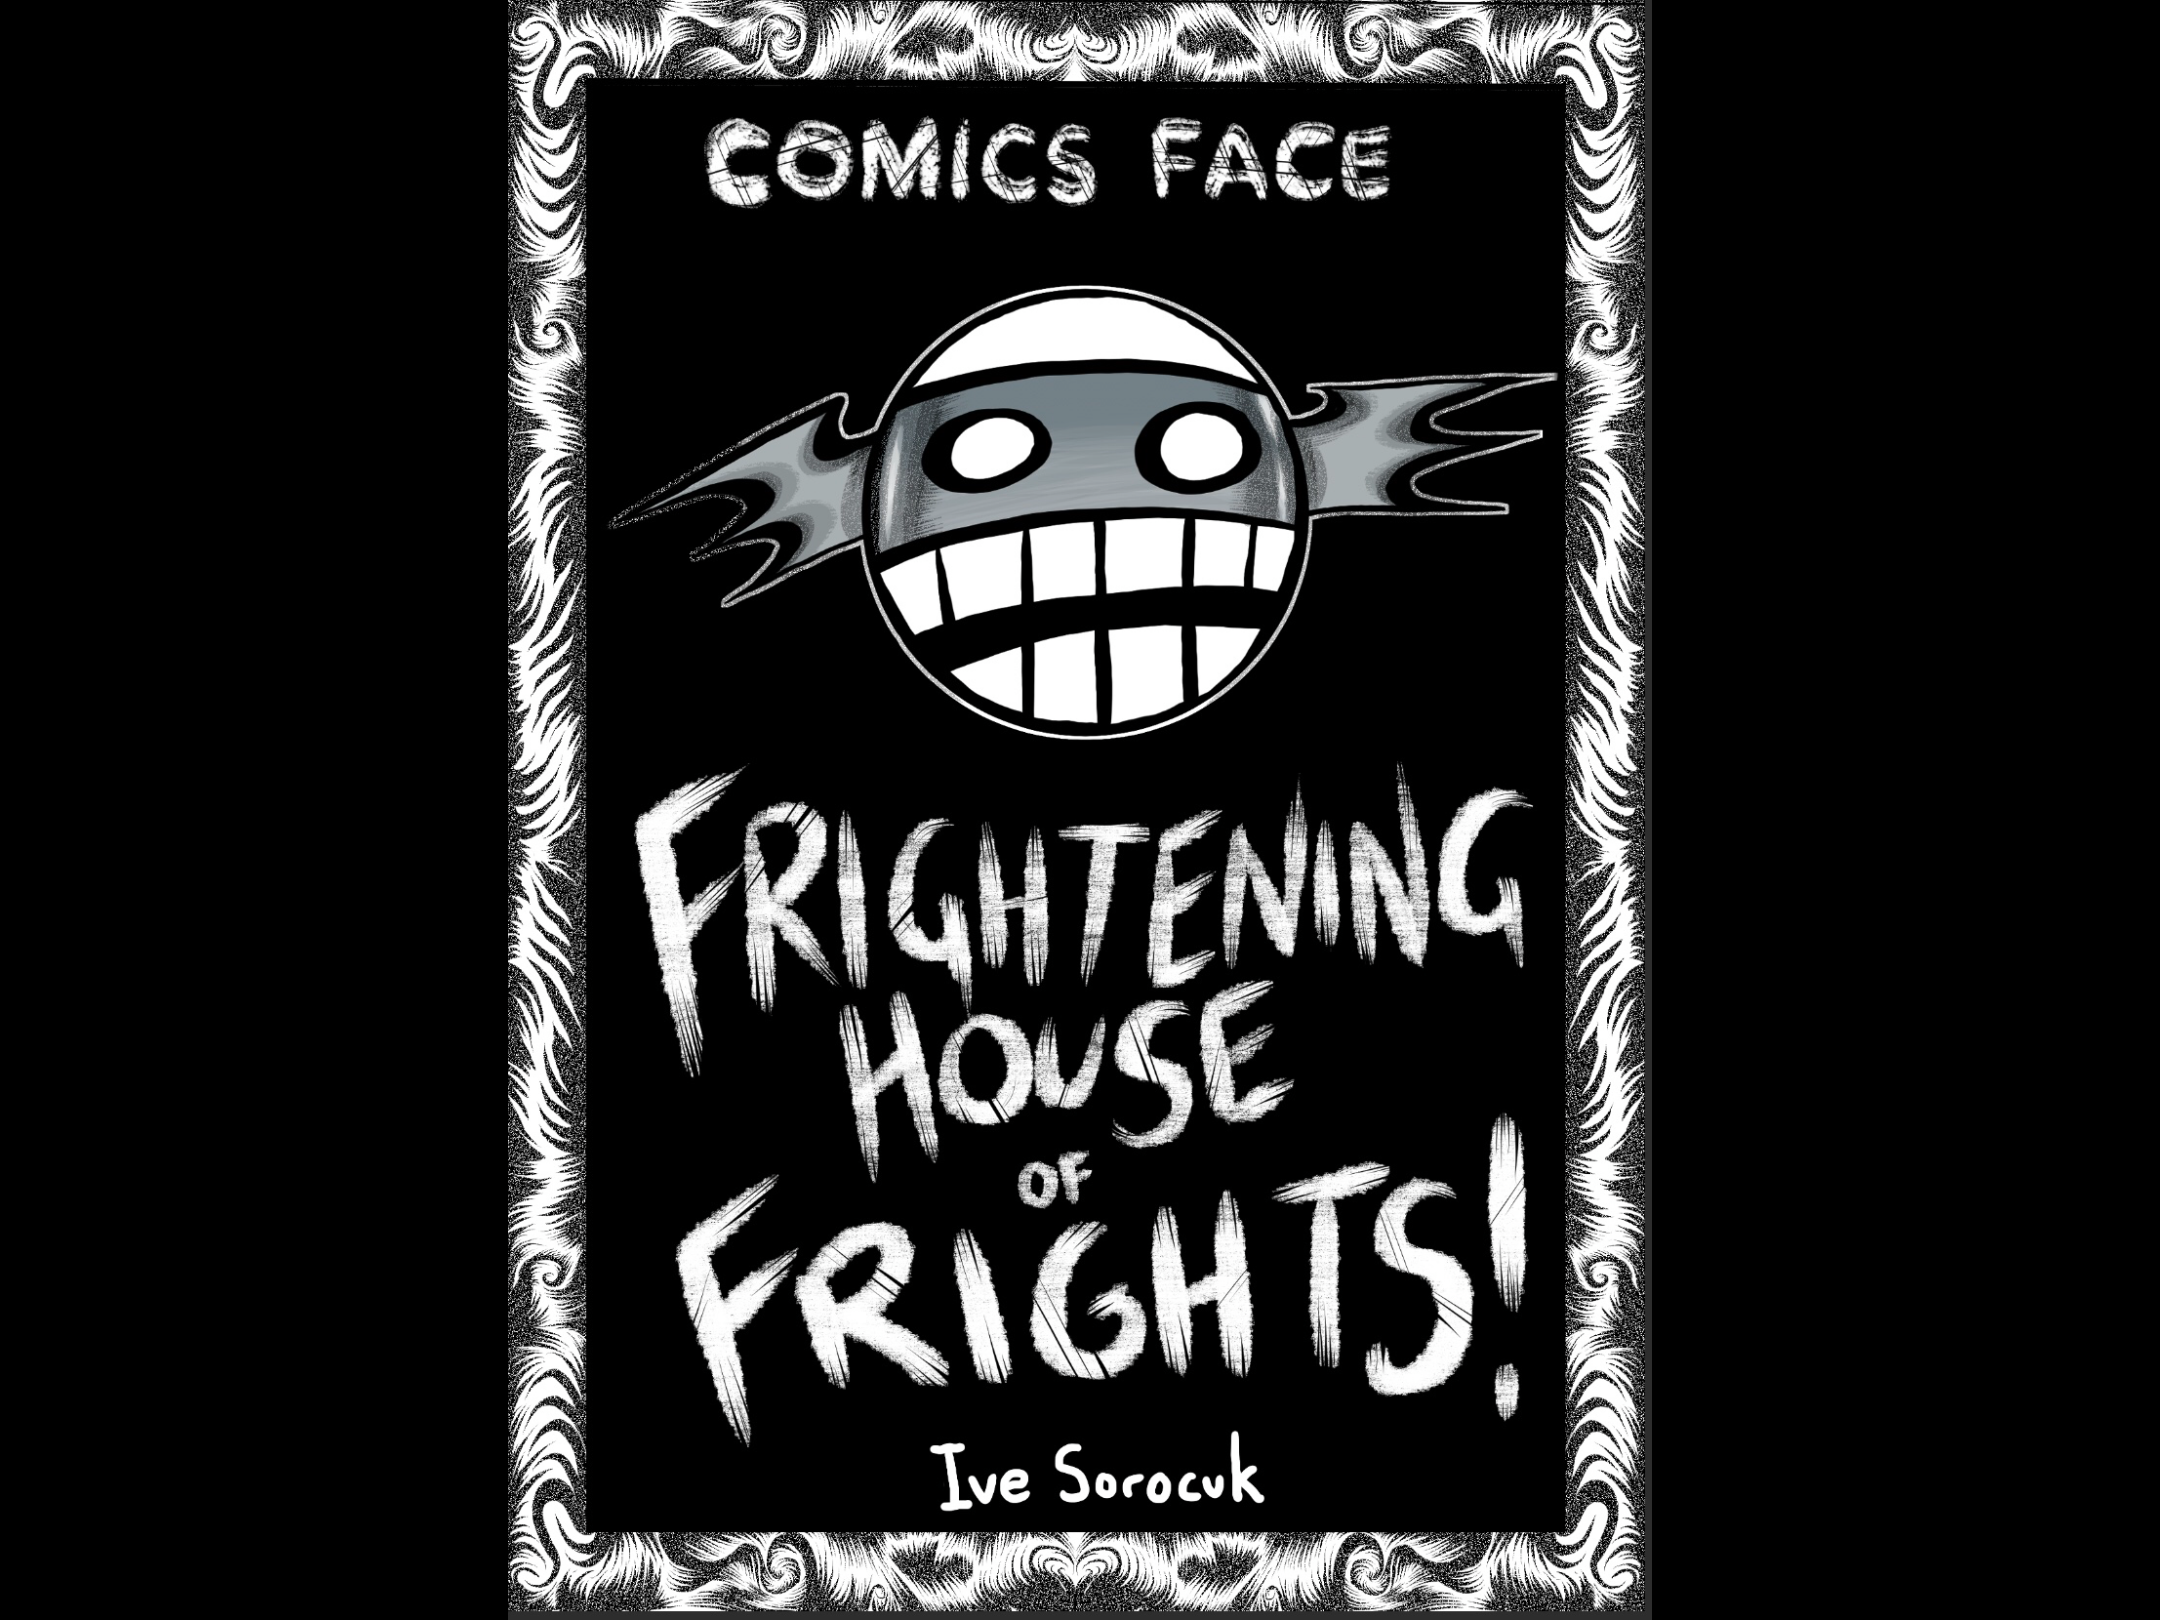 Comics Face Frightening House of Frights!